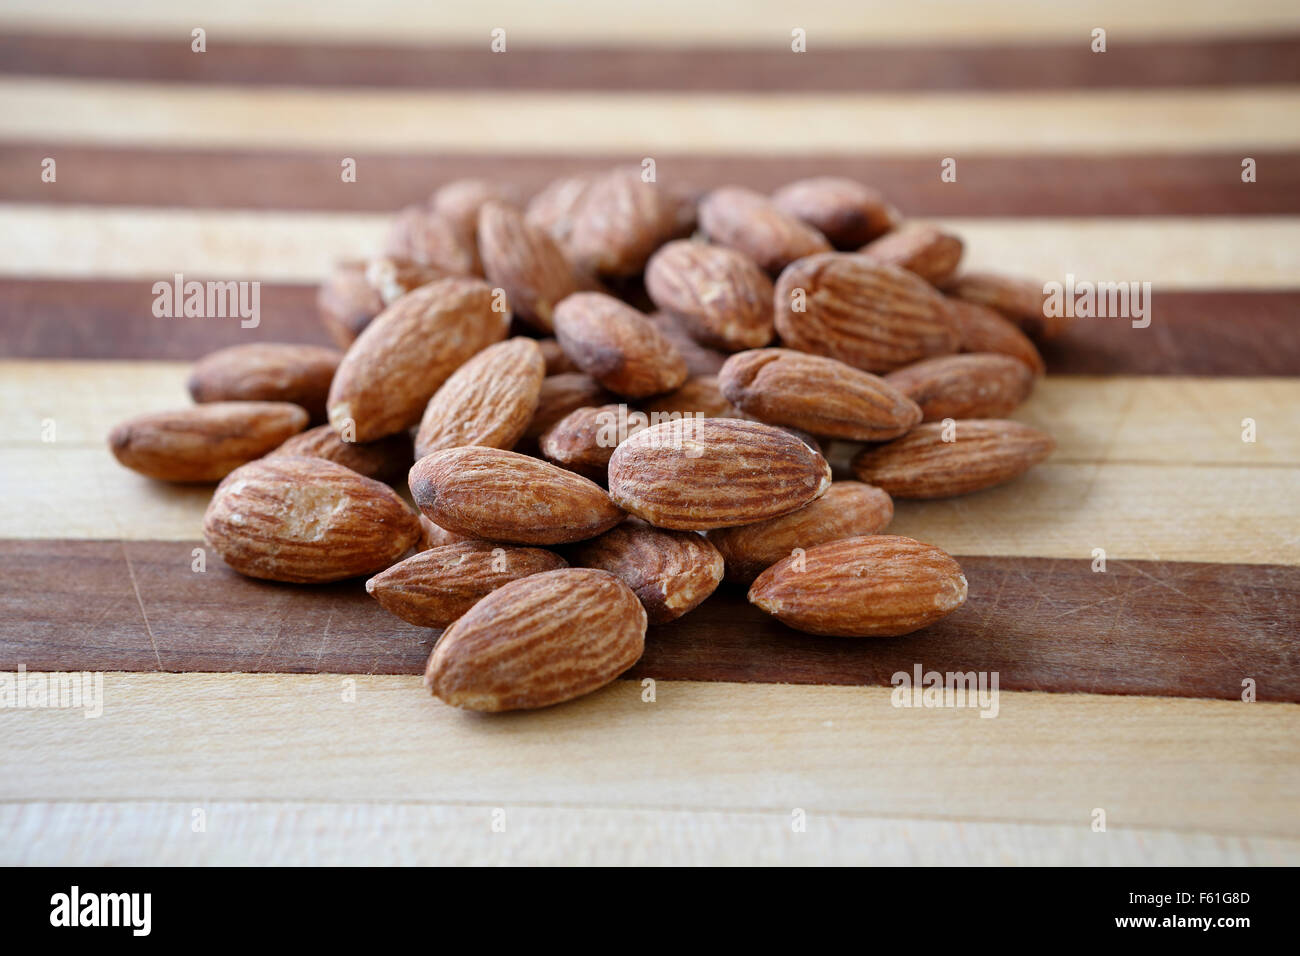 A bunch of almonds on a cutting board ready to become part of a healthy nutritious snack. Stock Photo